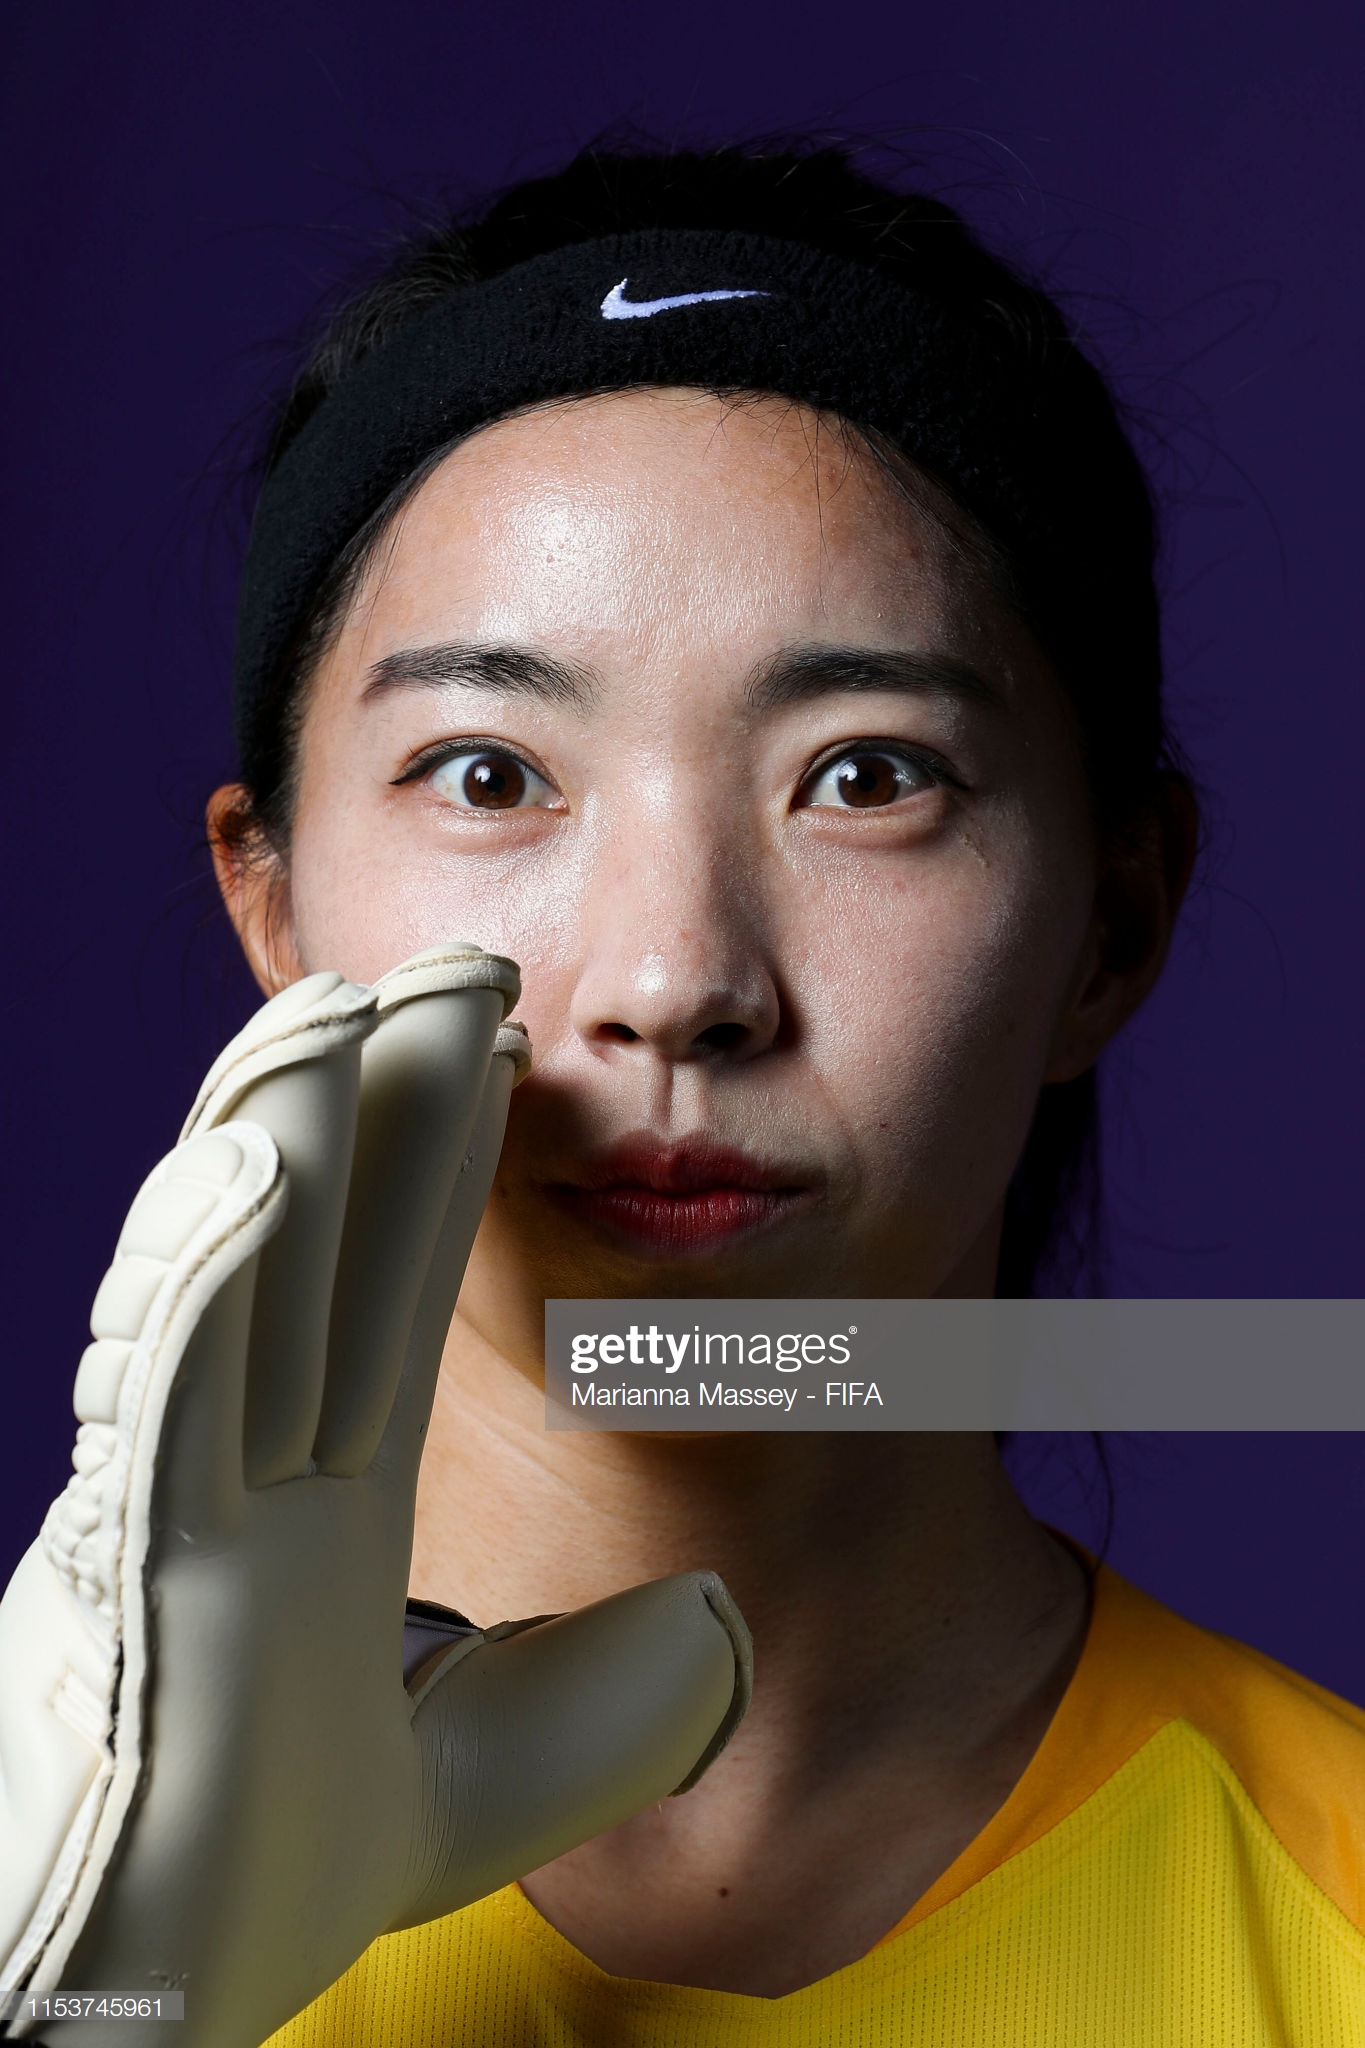 gettyimages-1153745961-2048x2048.jpg